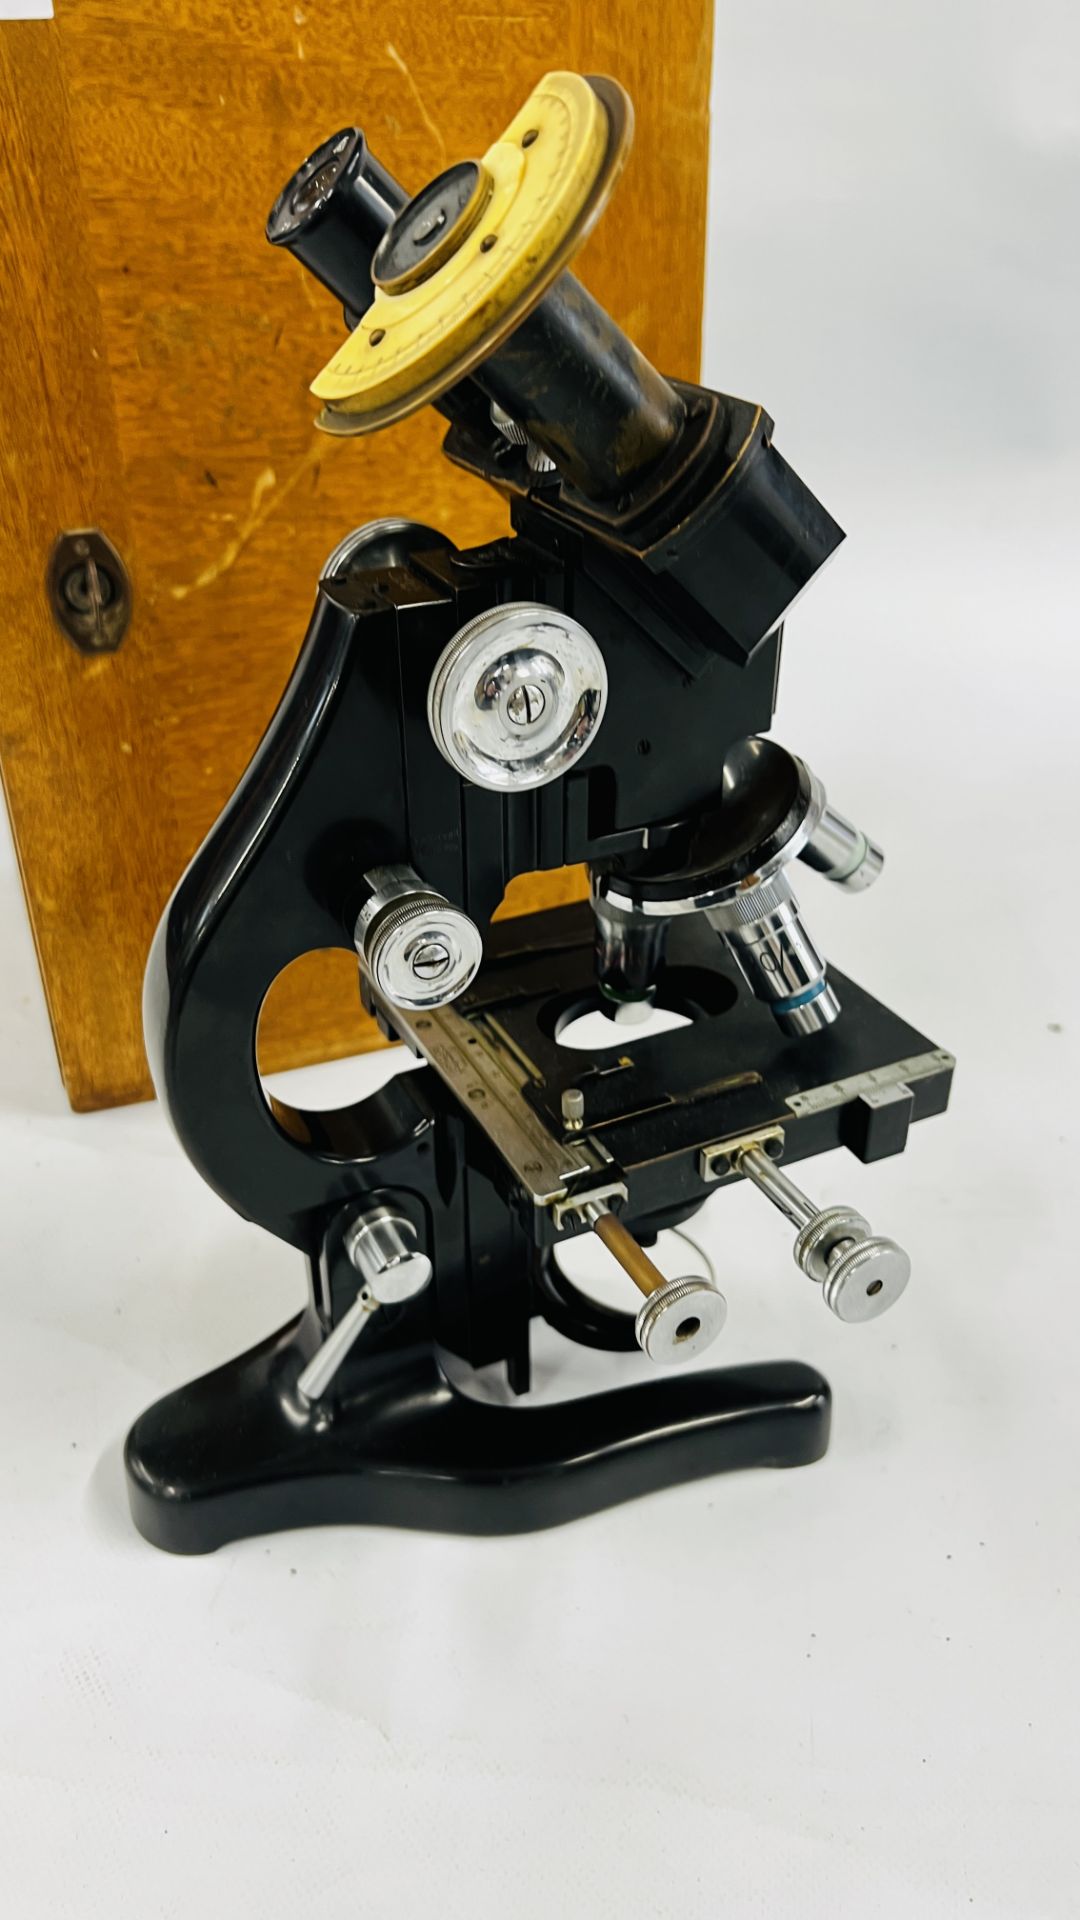 A VINTAGE CASED MICROSCOPE MARKED "WETZLAR" - W 26 X D 25.5 X H 40CM. - Image 5 of 7